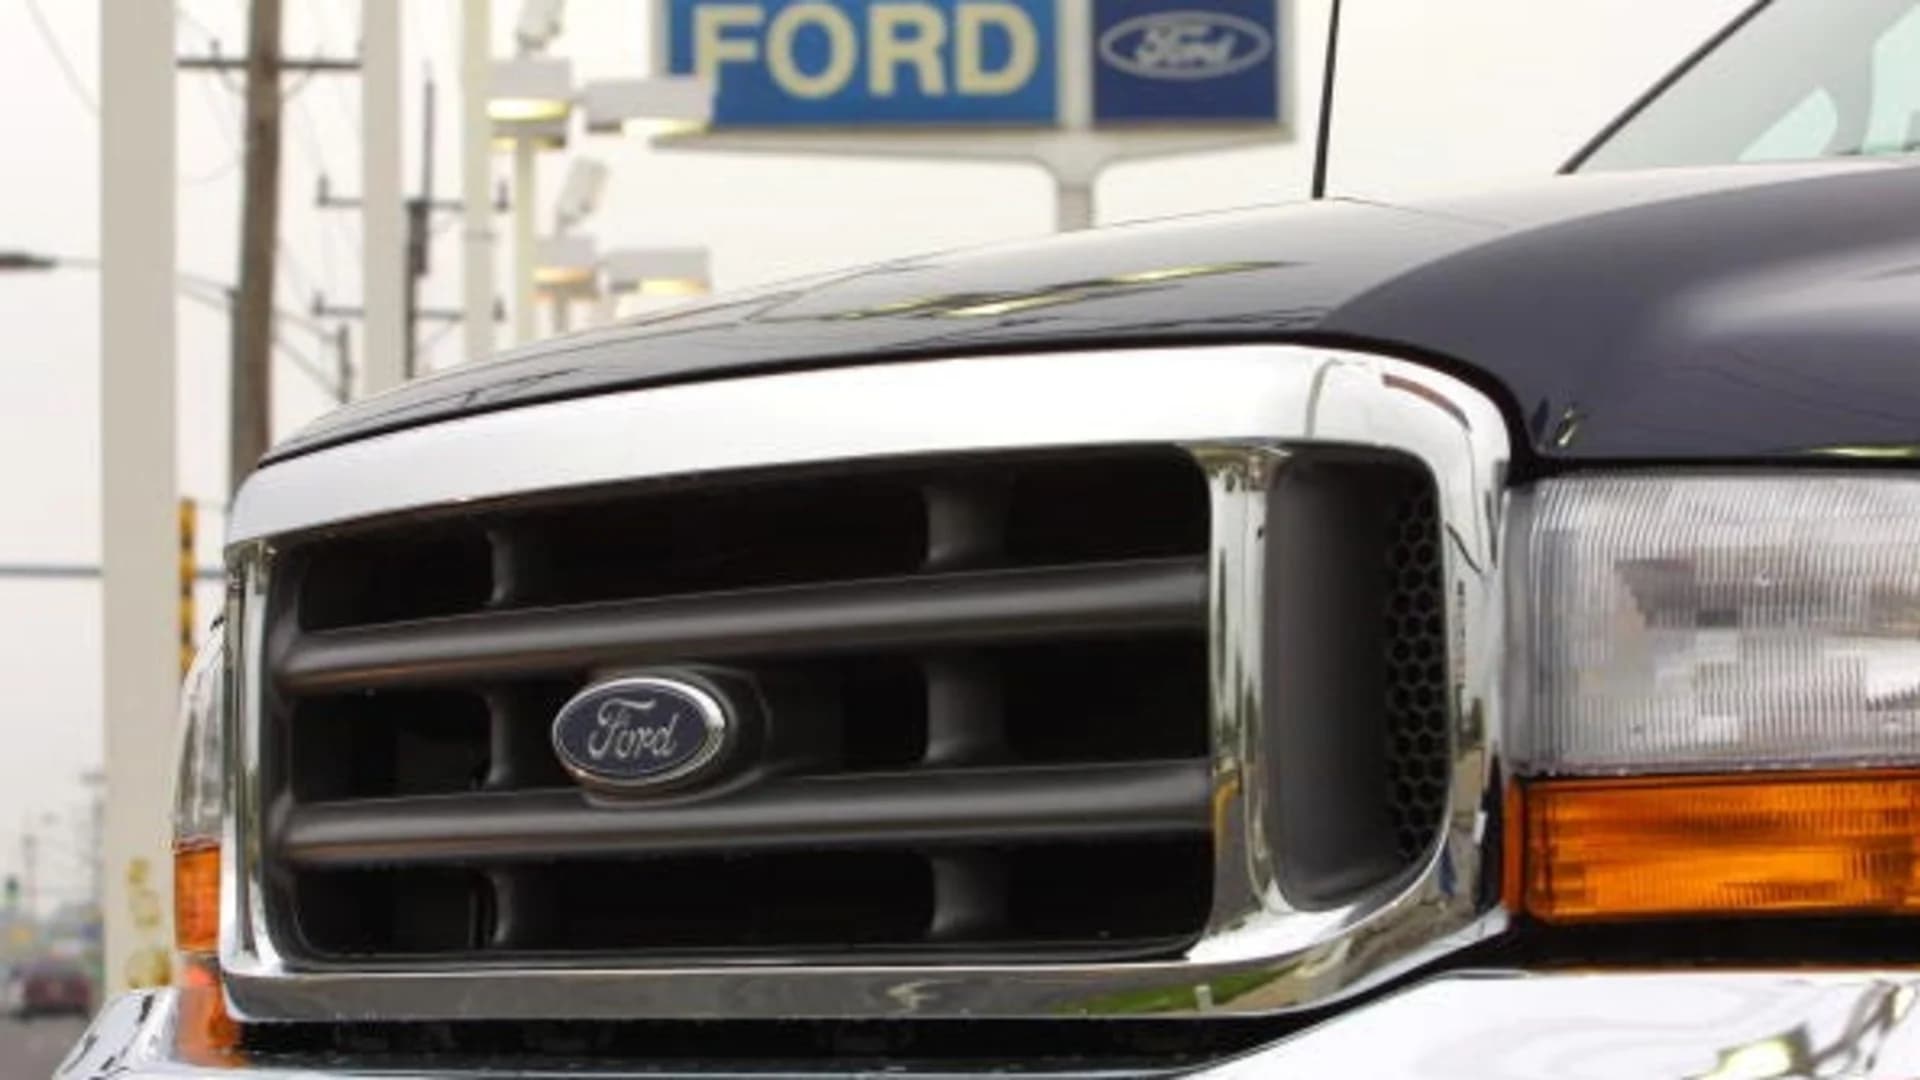 Ford recalls 2M pickup trucks; seat belts can cause fires